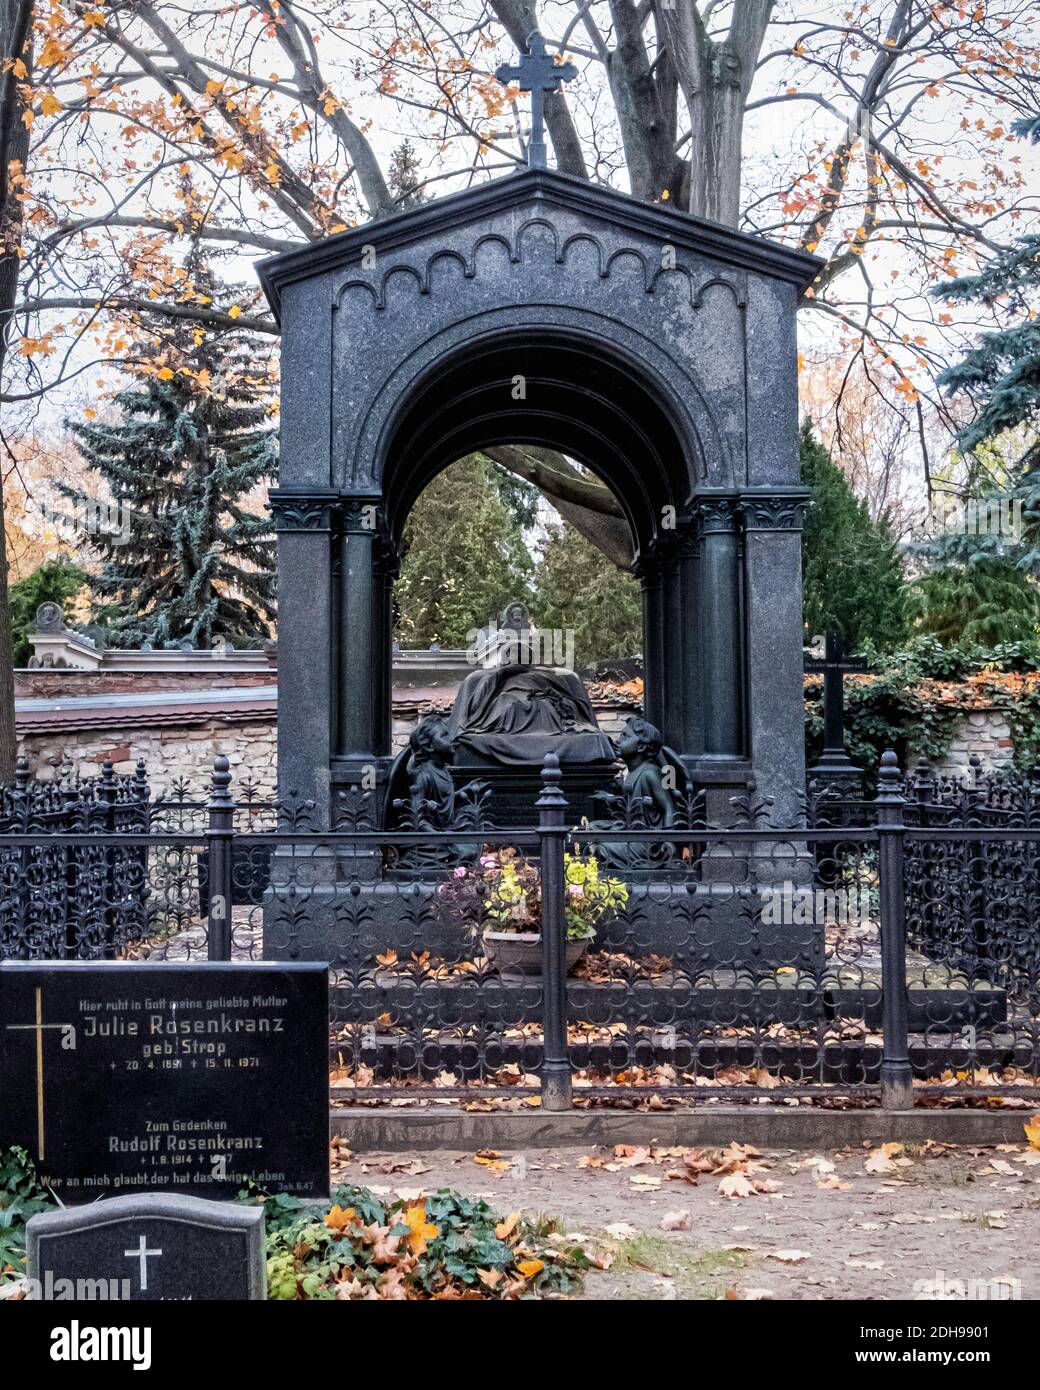 Berlin-Mitte, Oranienburg. First French Cemetery is a listed historical monument.Peter Louis Ravene 1793-1861 Tomb by Friedrich August Stuler Stock Photo